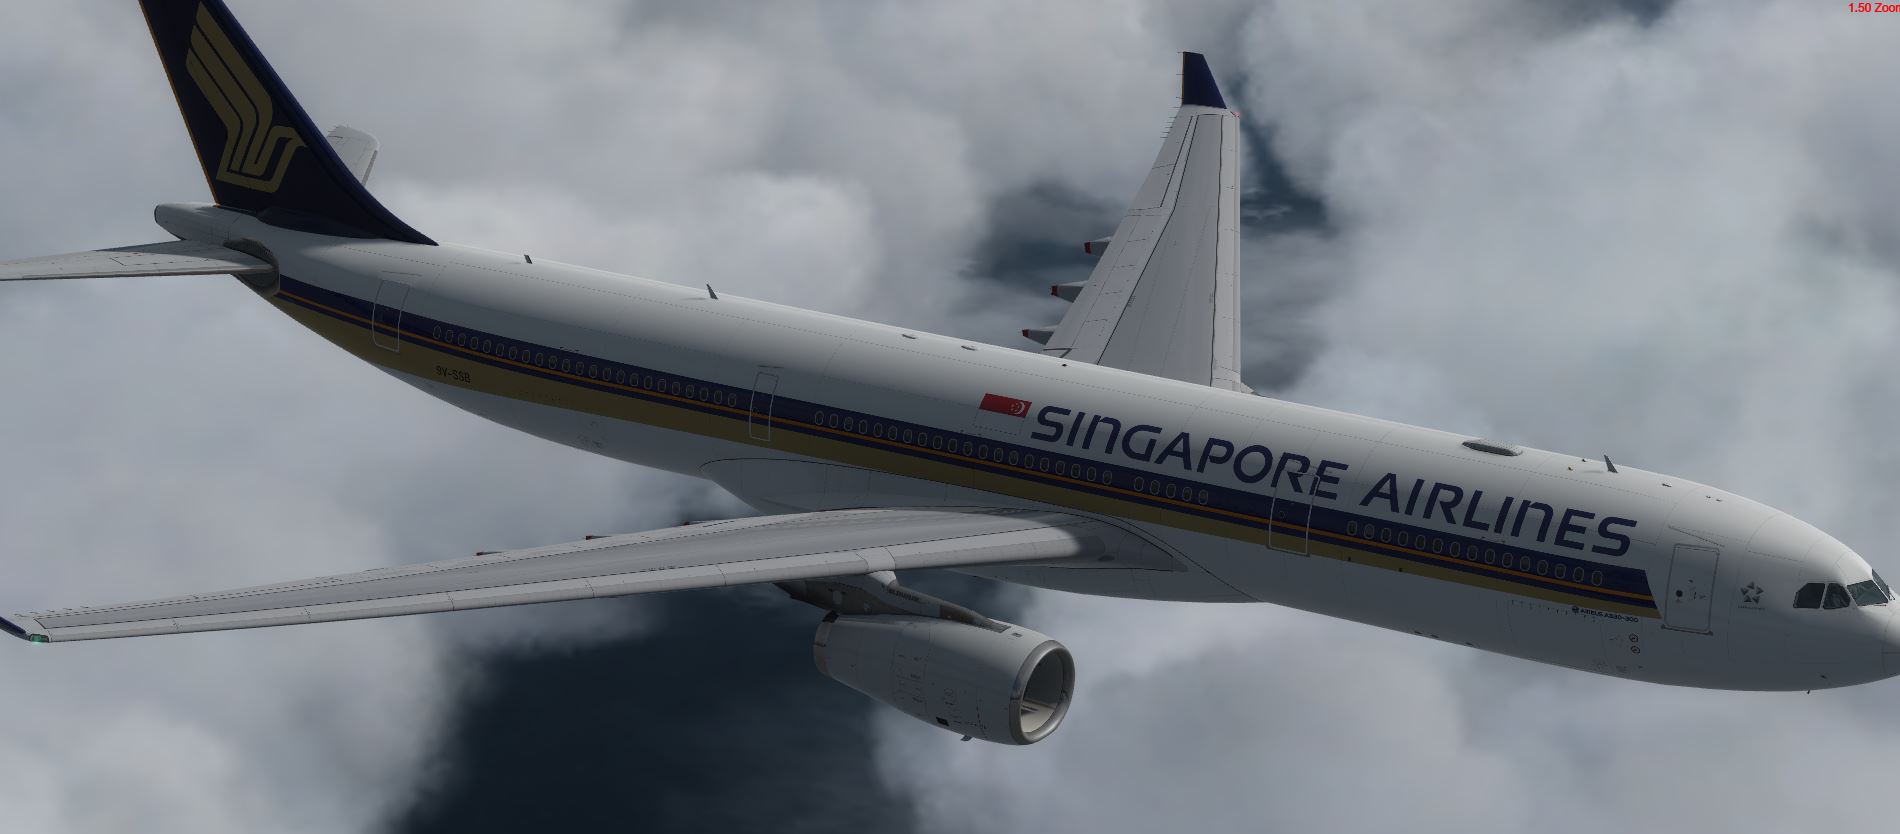 AS A330 Singapore Airlines-2963 